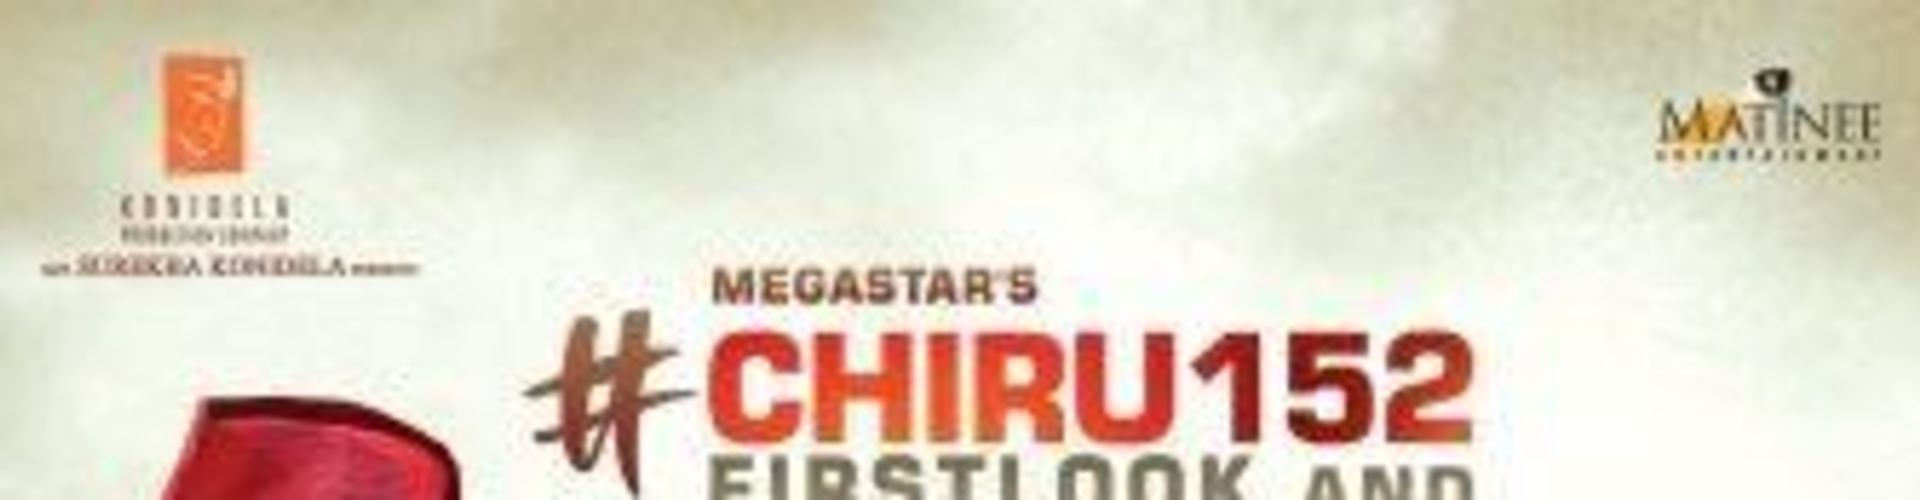 Ram Charan Announce The First Look And Motion Poster Date Of His Film ‘Chiru 152’.